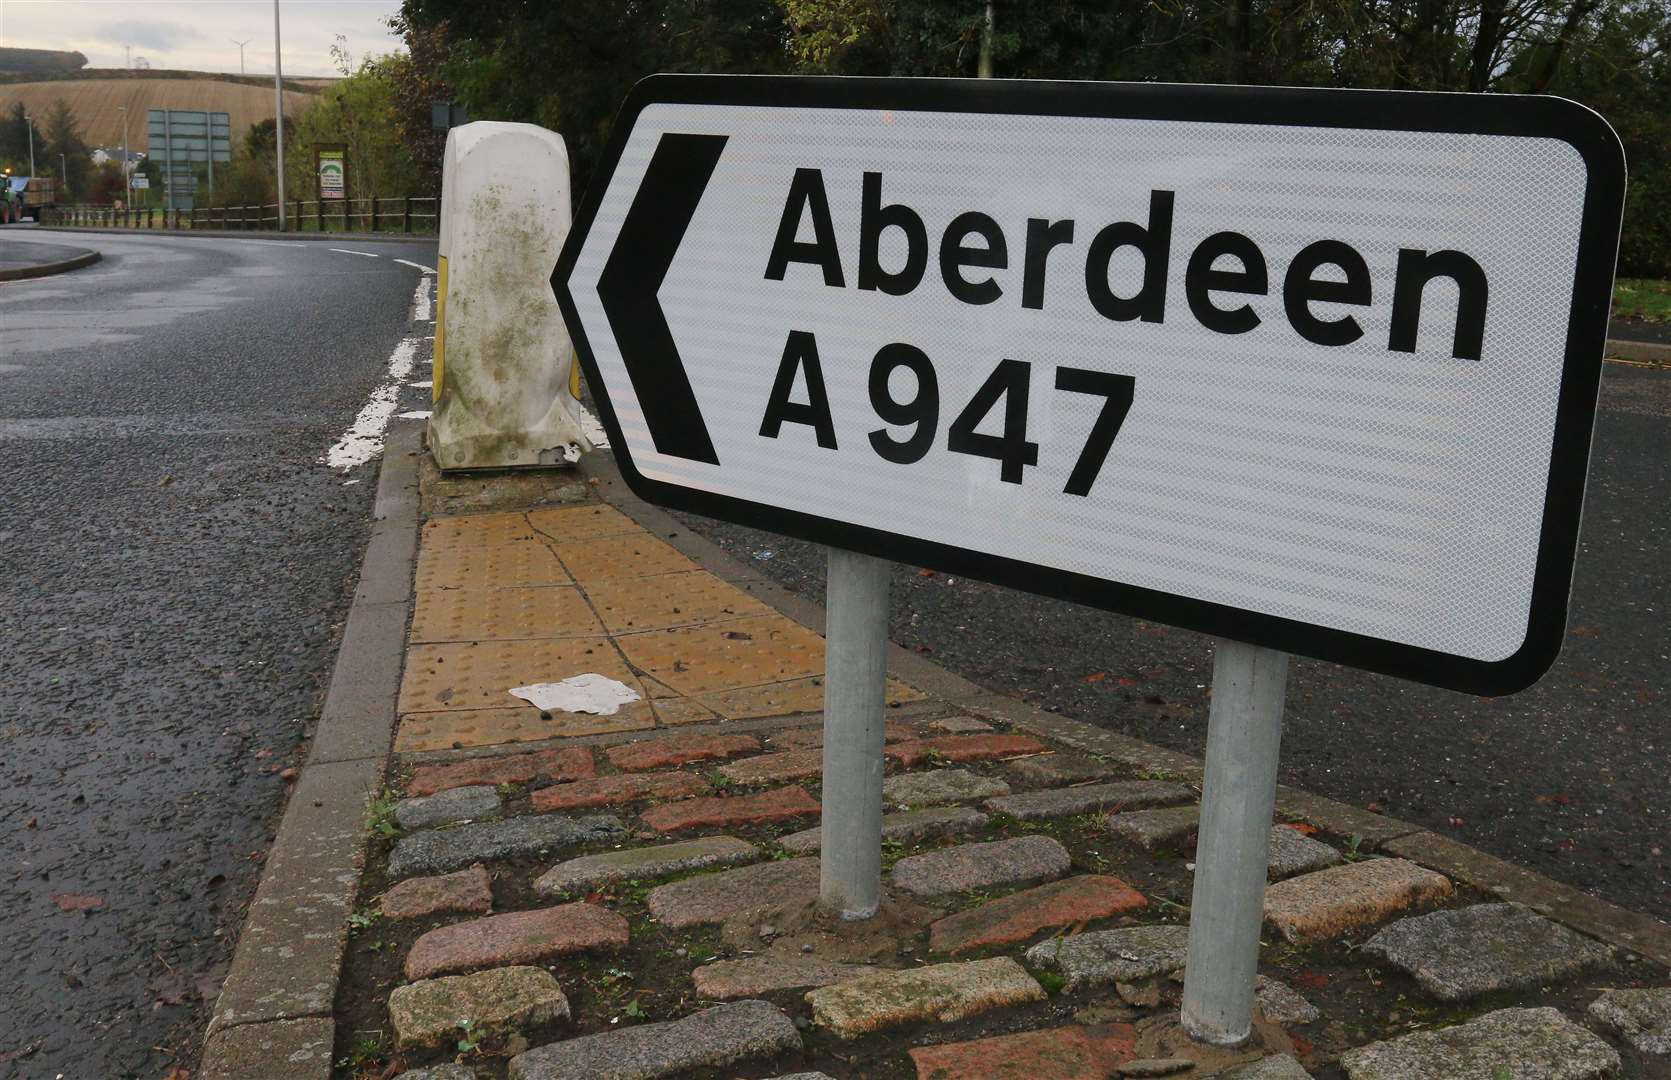 Councillors will discuss the current actions planned to improve road safety on the A947